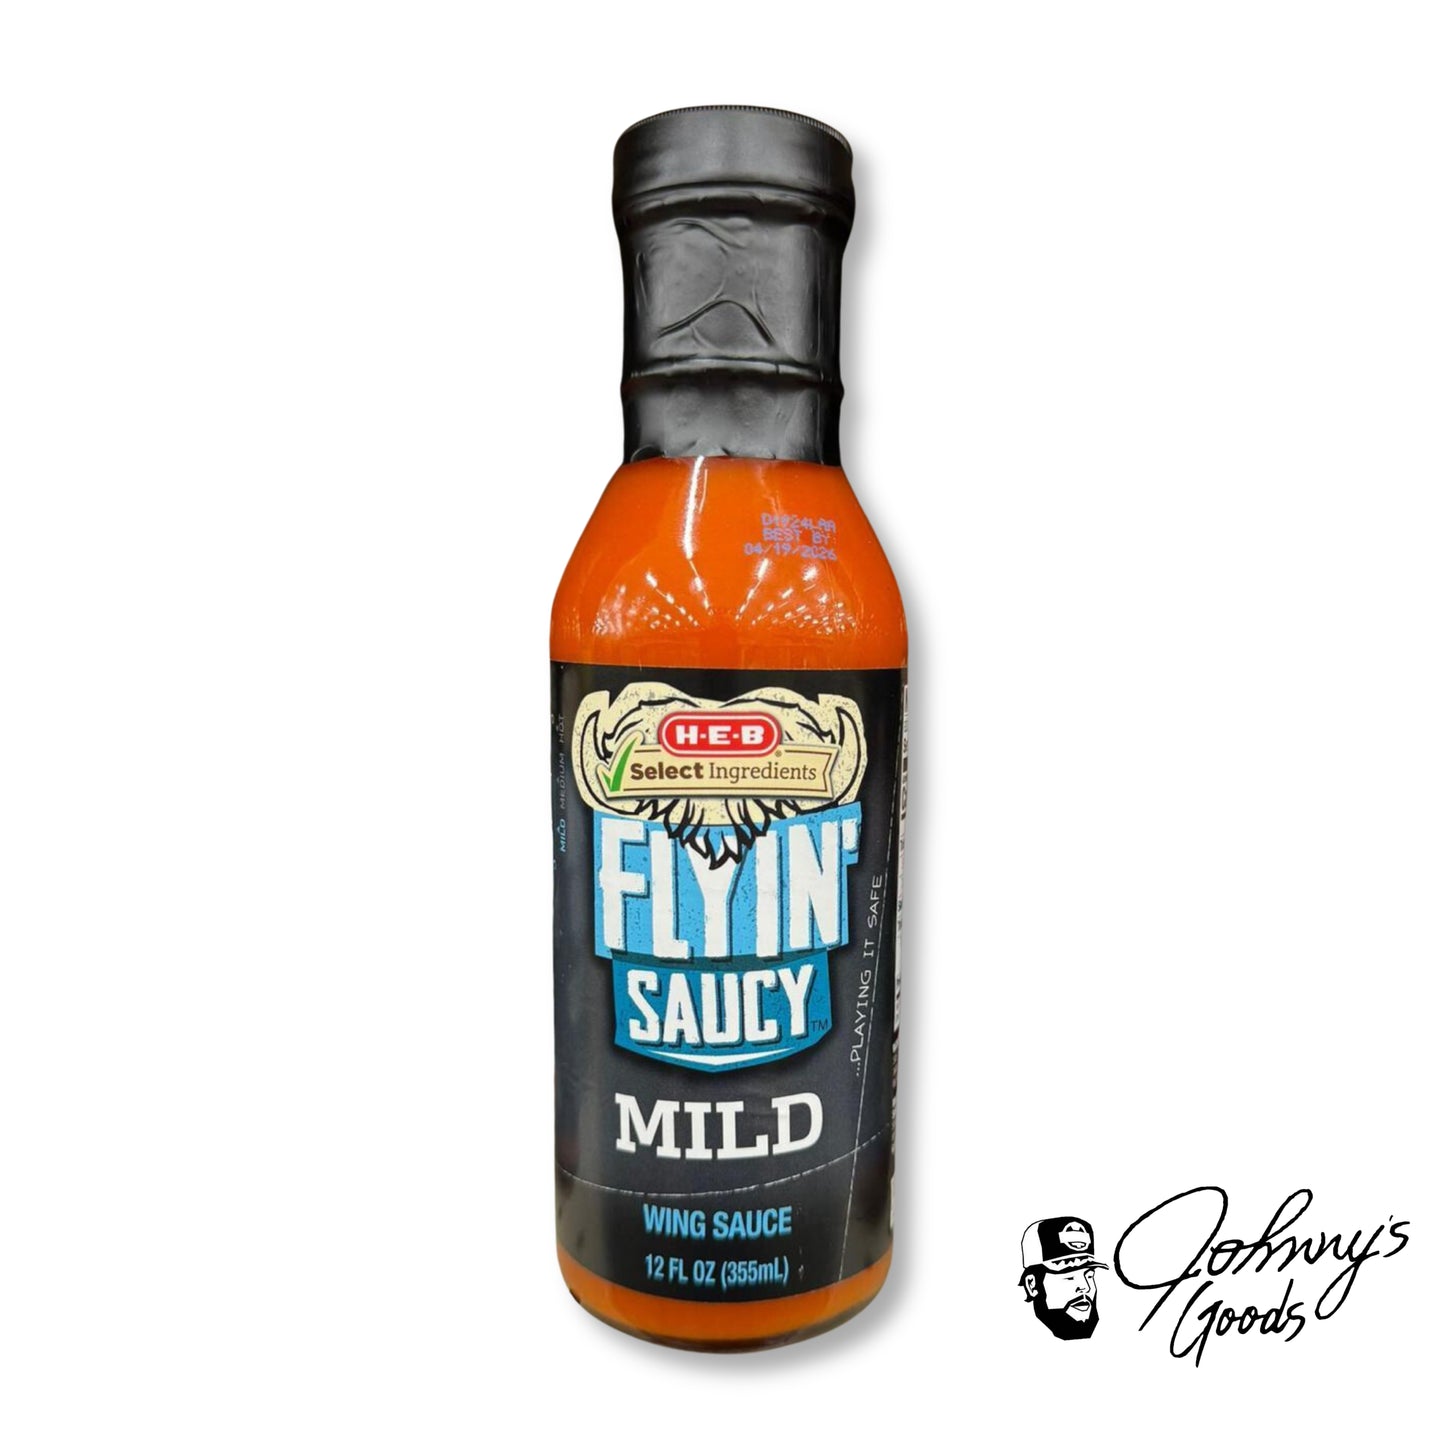 HEB Flyin' Saucy Wing Sauce h-e-b texas sauces mild heat wing sauces condiments